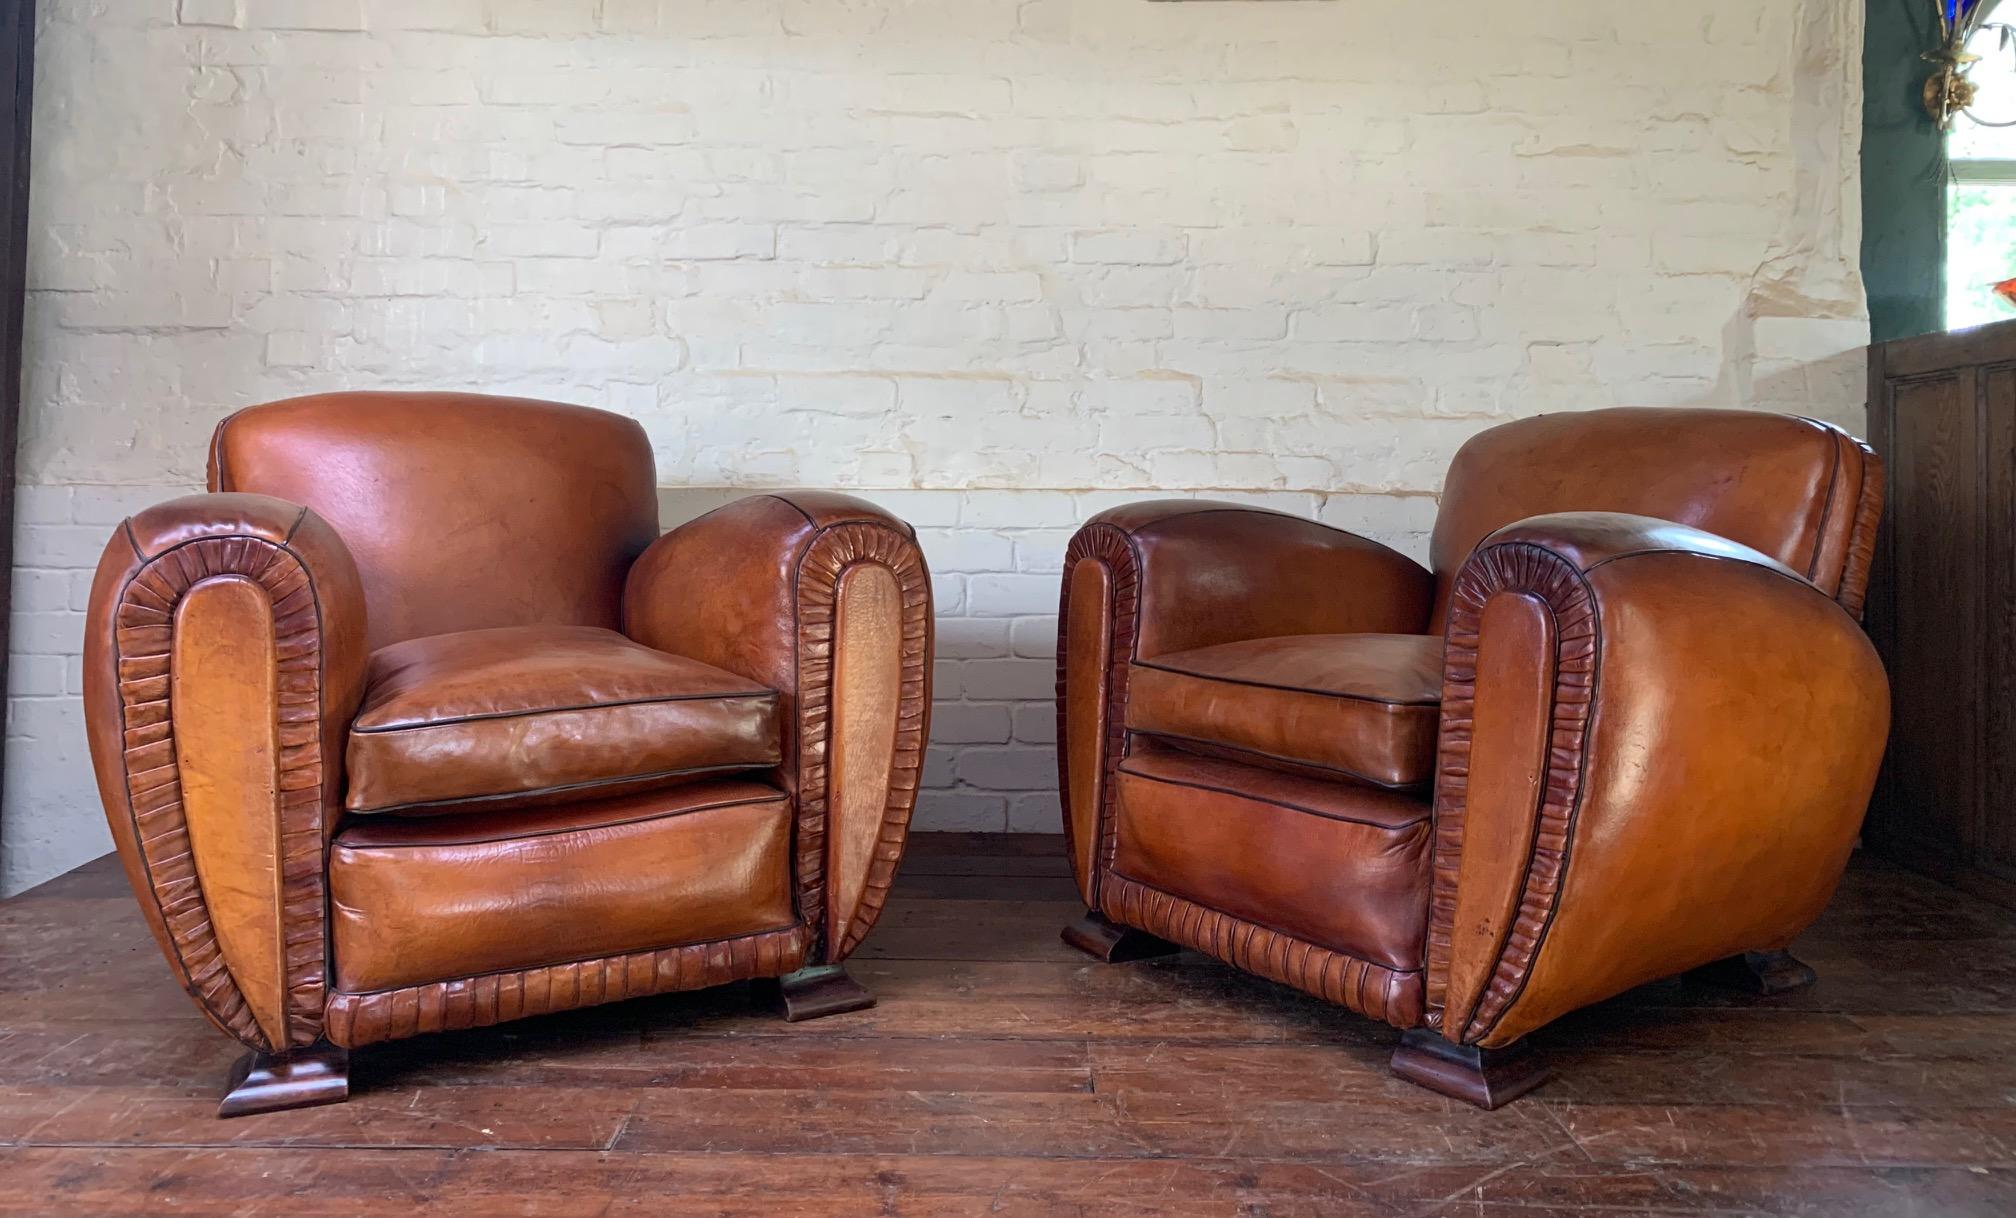 If you’ve been on the search for the perfect, most beautiful, most special pair of original club chairs, then these are so. Extremely rare, these original Cuban lounge model with ruched detailing, are very special. The original caramel leather is